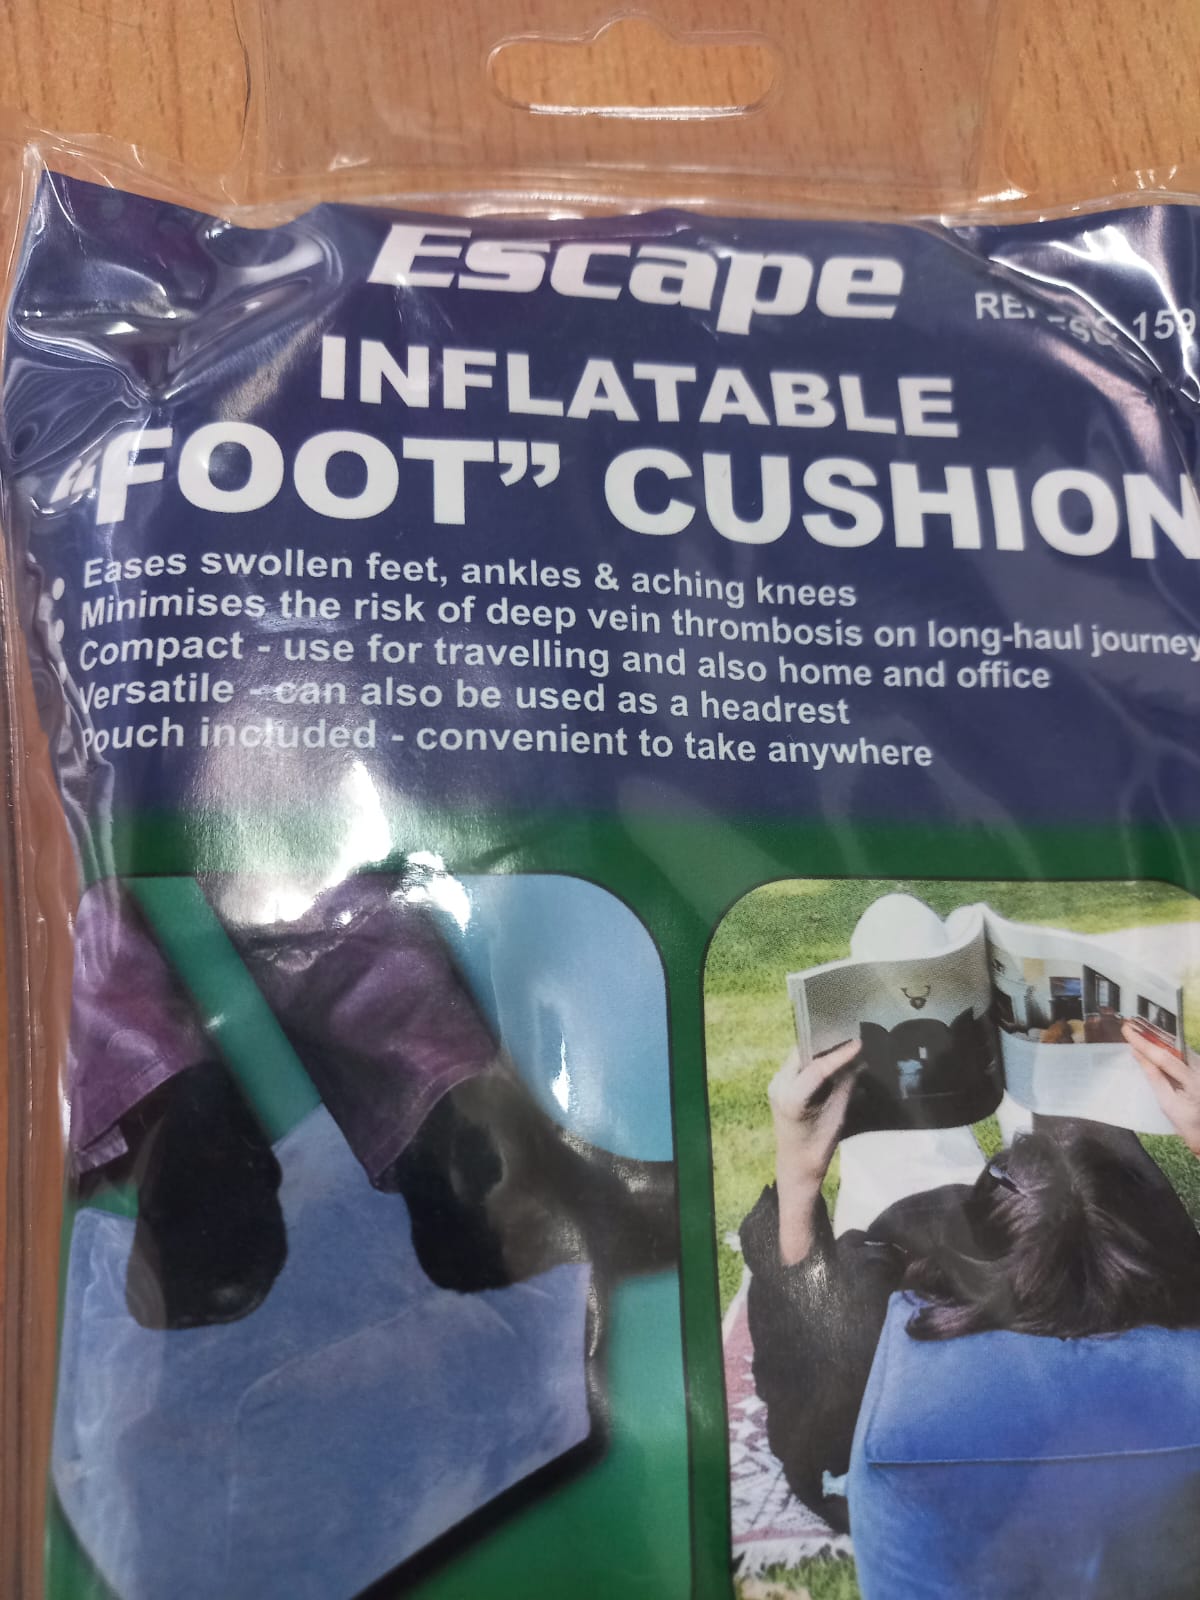 Inflatable Foot cushion (available in grey and navy) - 0